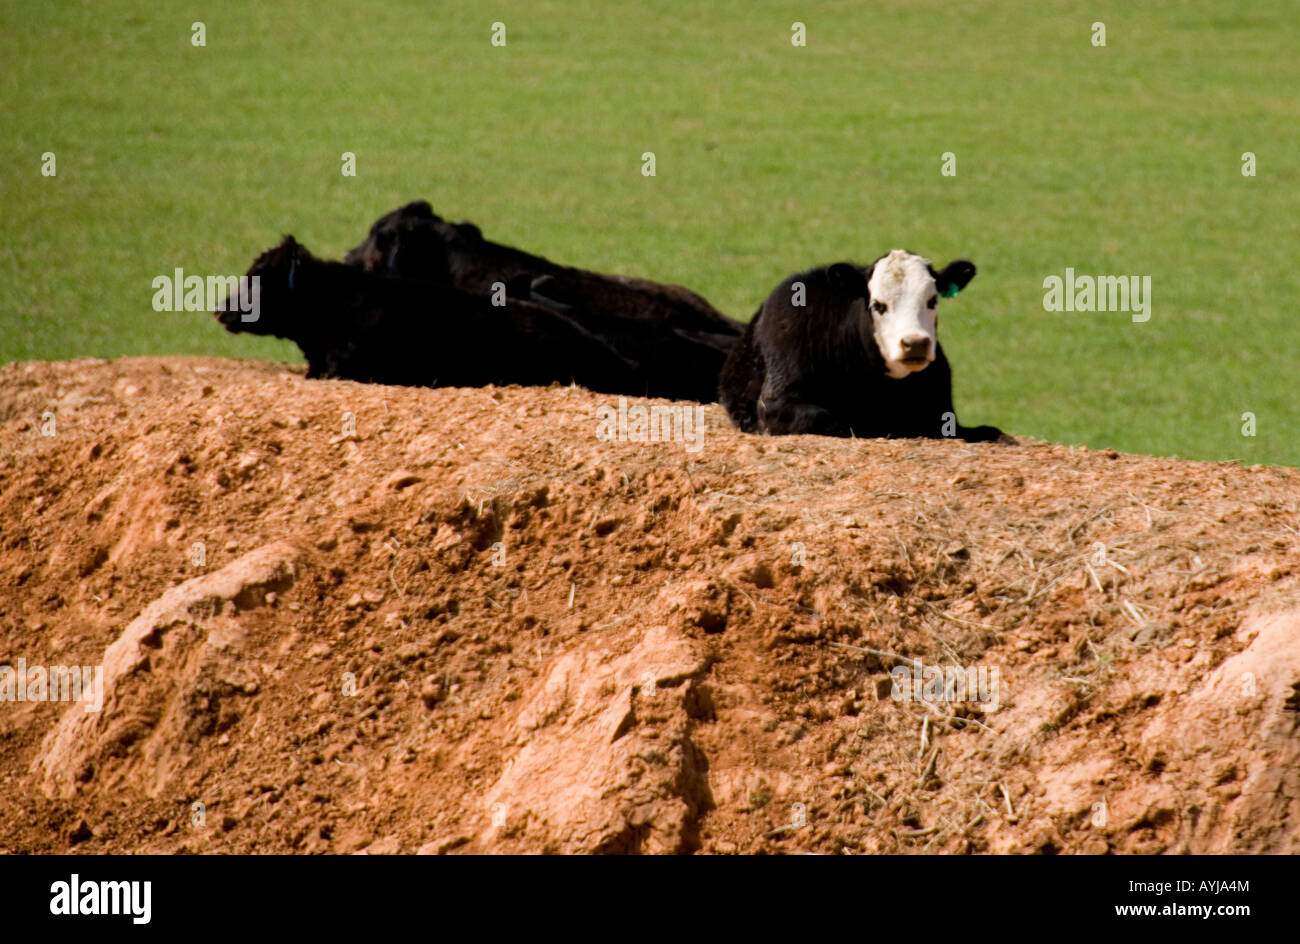 Black Angus hybrid cattle lie on an earthen dam by a pond in northwestern Oklahoma, USA. Stock Photo